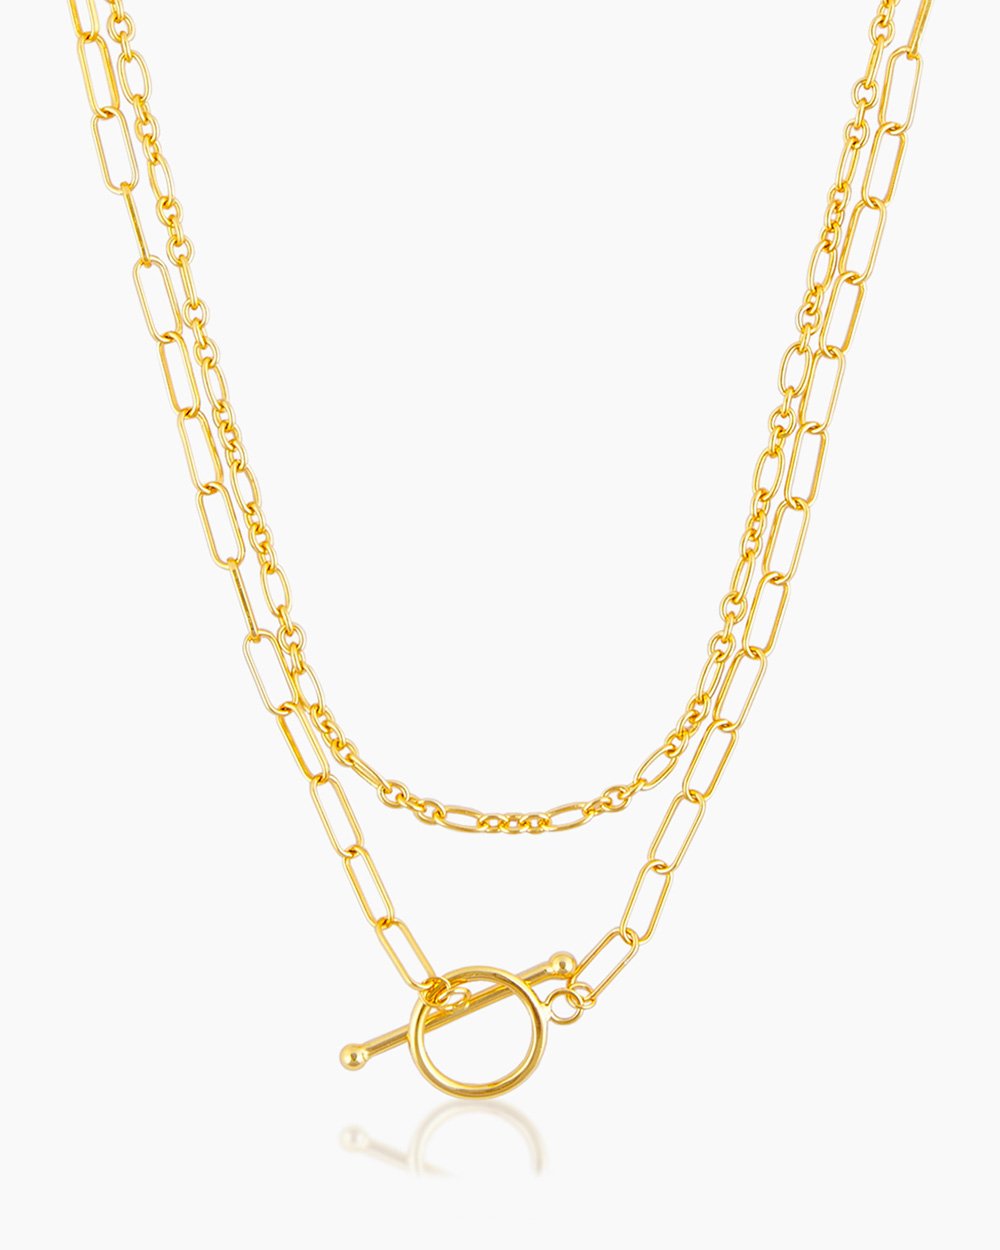 The Venice, a gold illusion necklace that features two styles in one chain